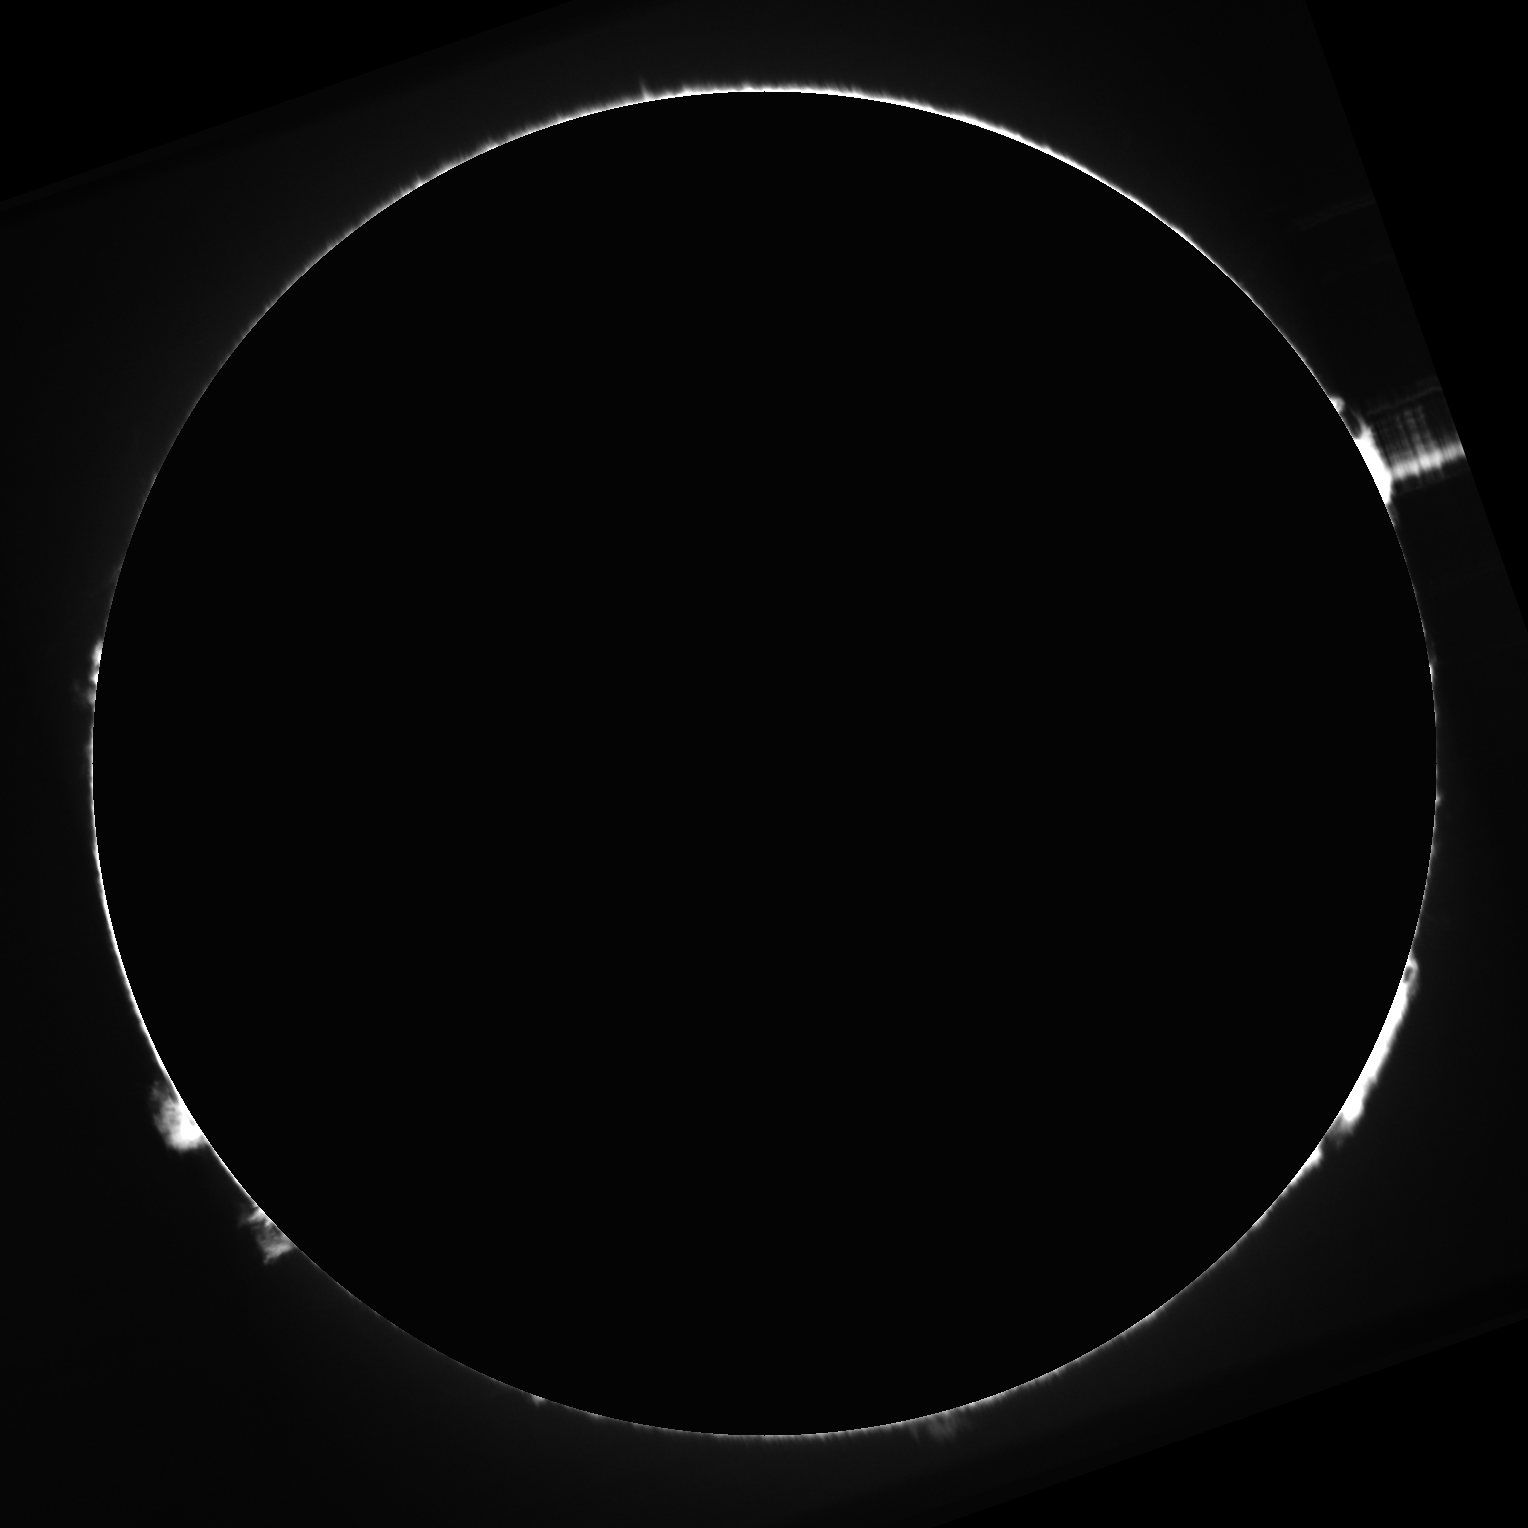 _2024-02-19-1148_6-U-G-Sun_Halpha_protus.png.a2639e49c1d1f522eac26d3ff7287ce0.png